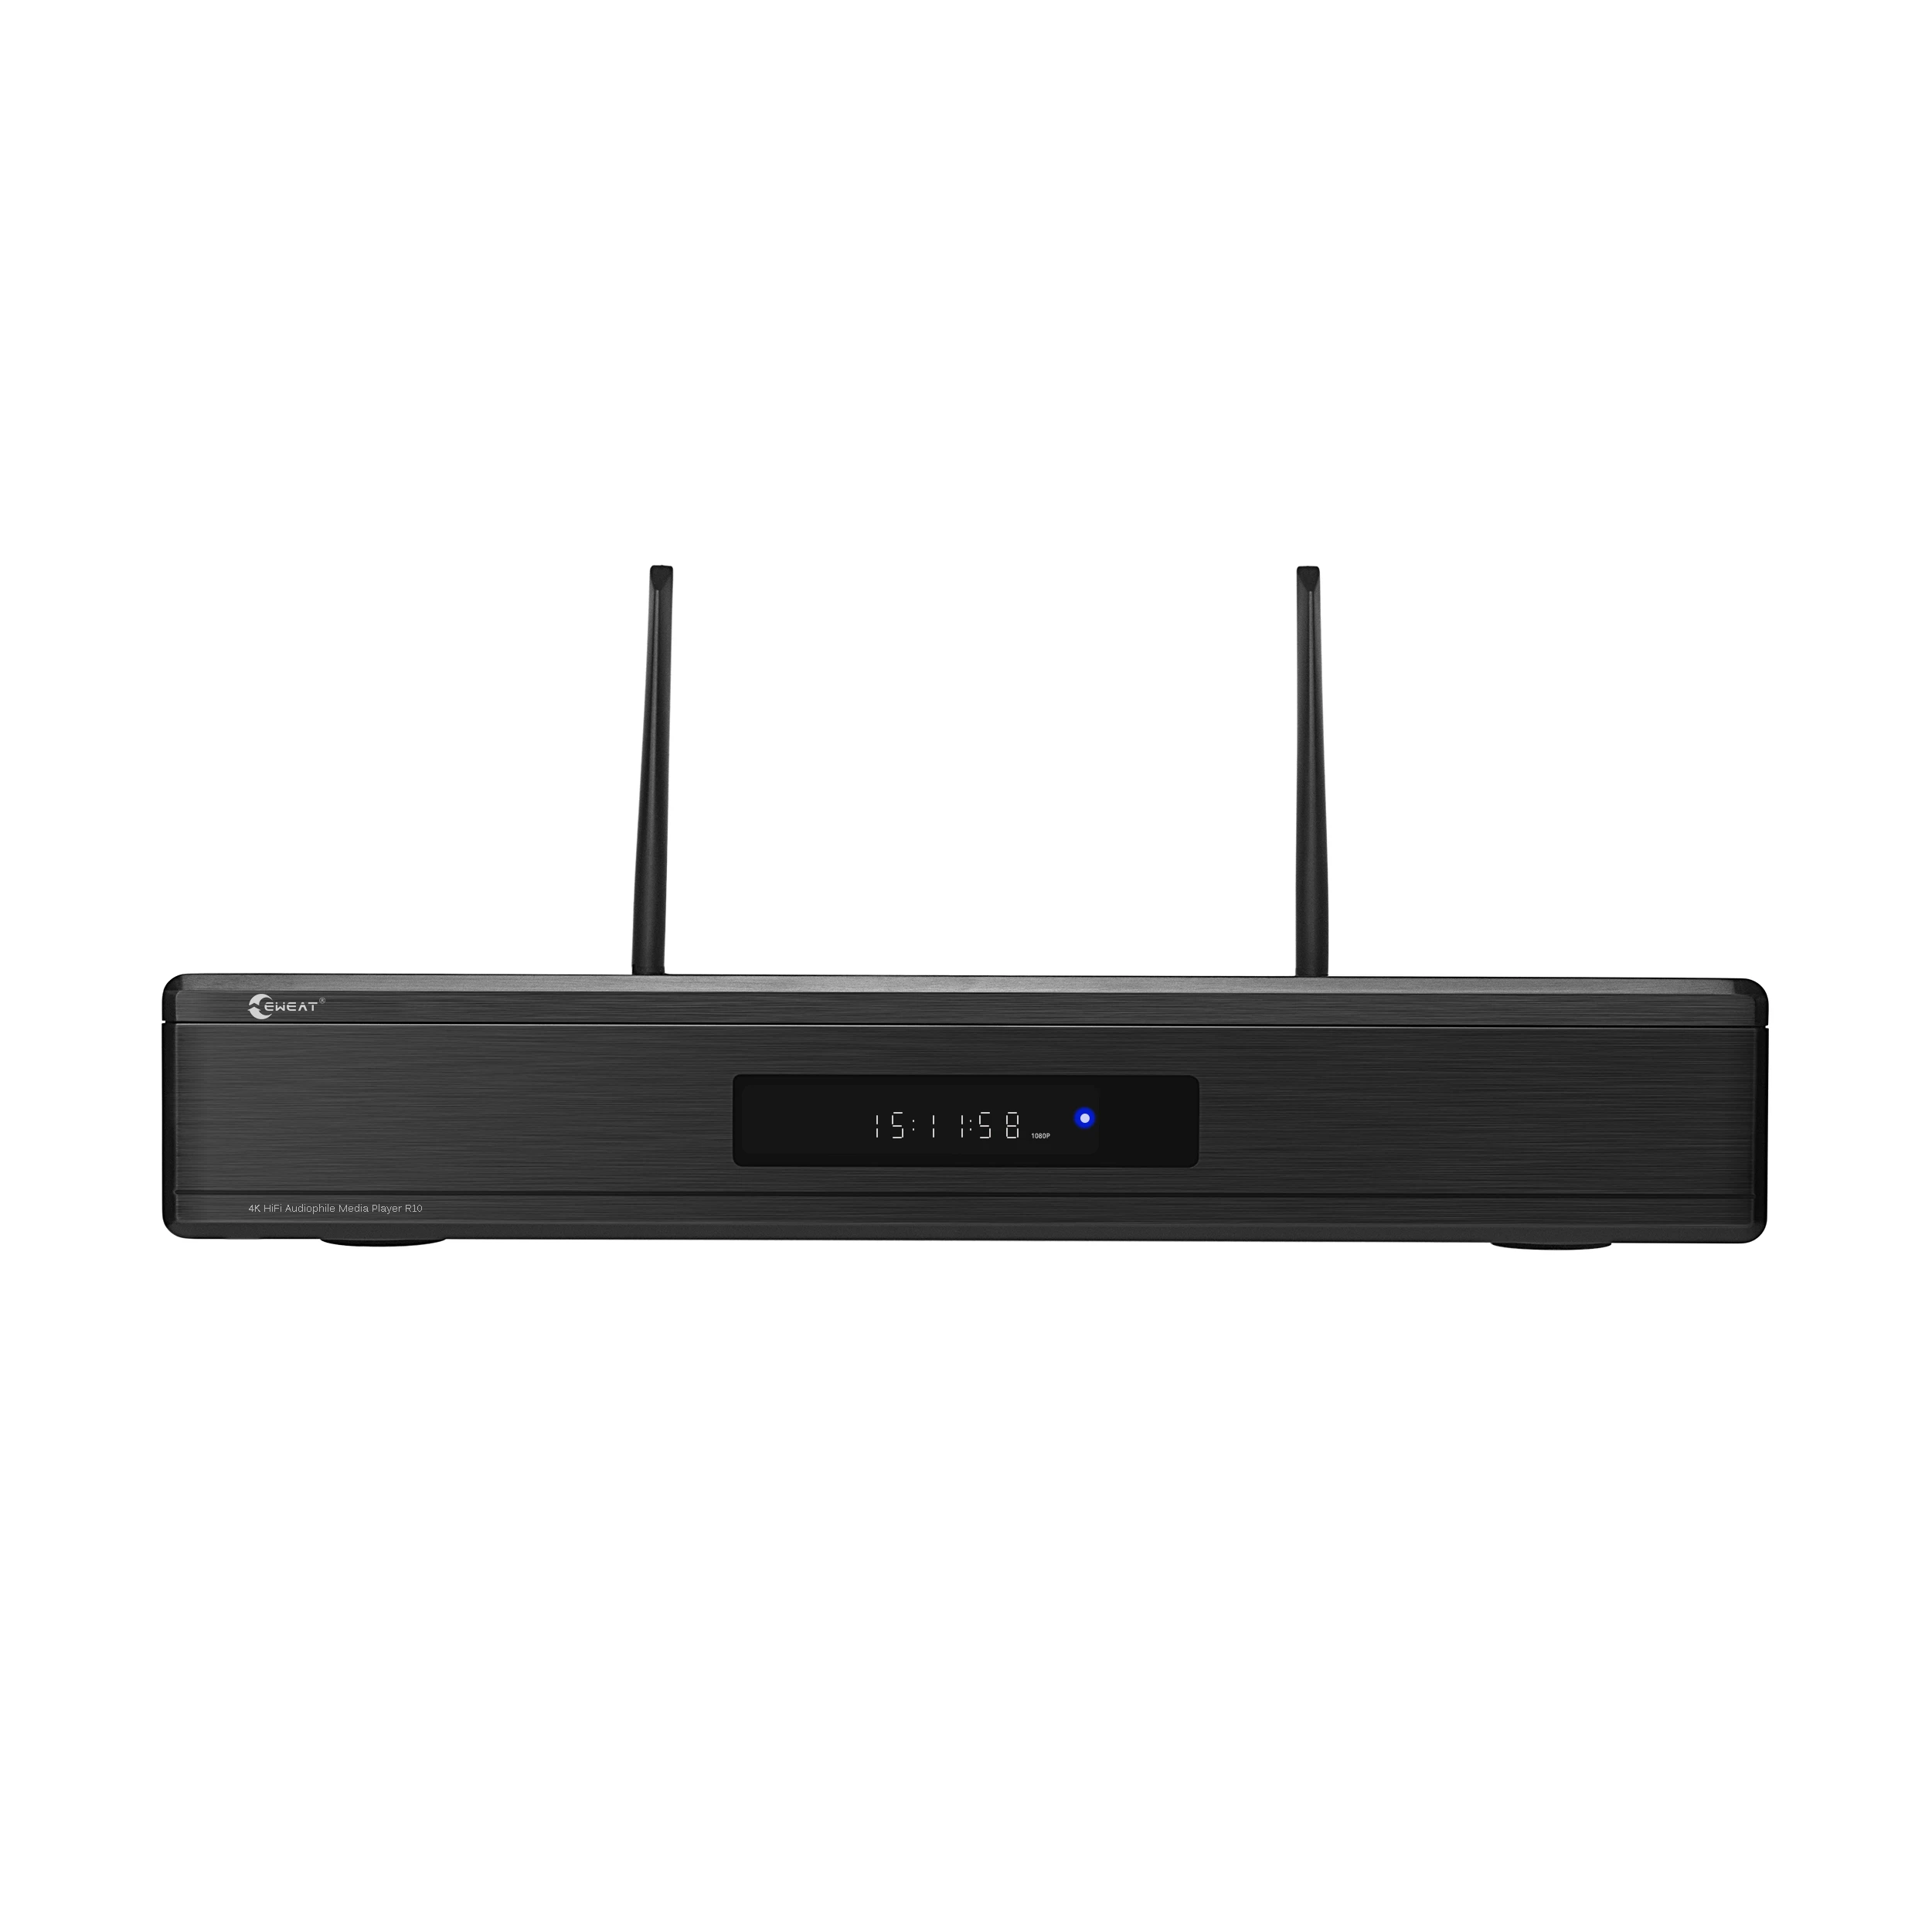 EWEAT R10PRO 4K UHD Hi-FI Home Theater Blu-ray MENU and MoviePosters Android Media Player